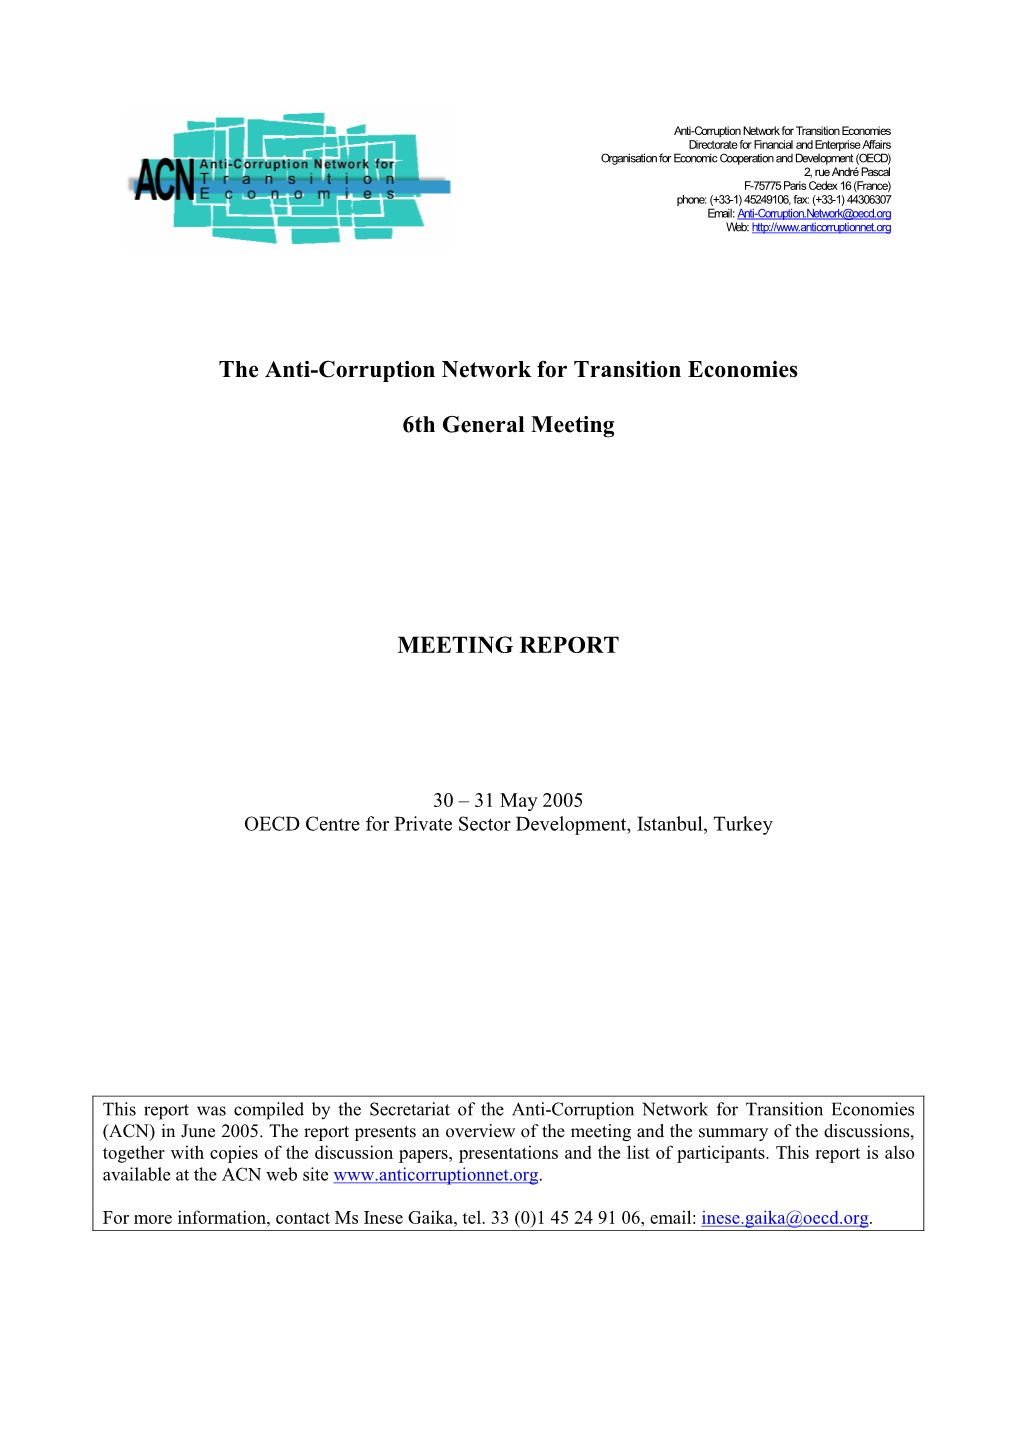 The Anti-Corruption Network for Transition Economies 6Th General Meeting MEETING REPORT